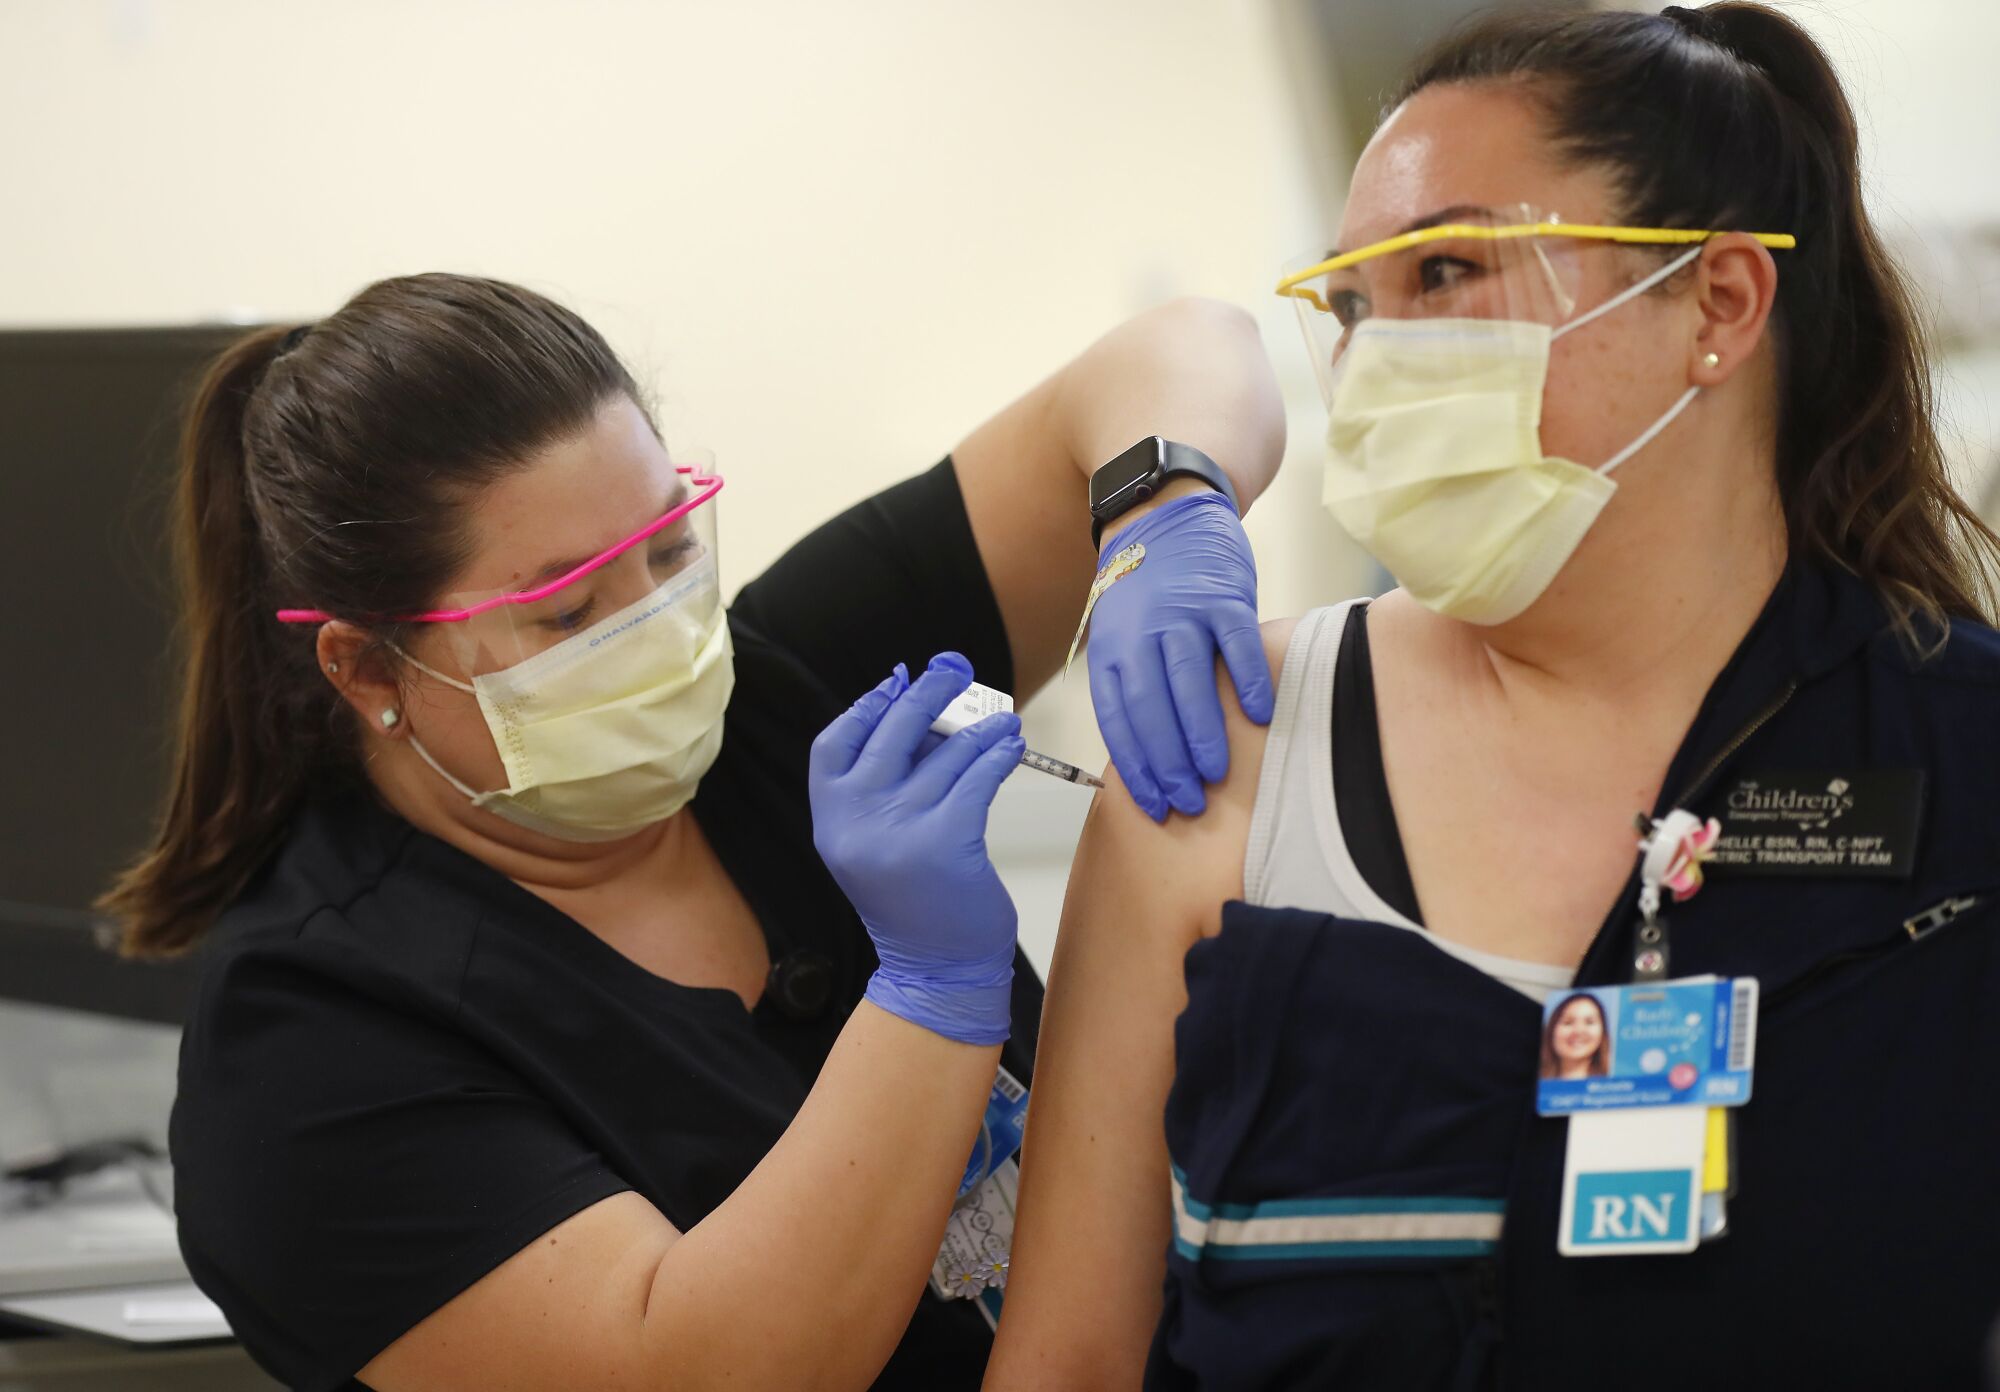 RN Rachel Marrs gives a Pfizer-BioNTech COVID-19 Vaccine shot to RN Michelle Gaano at Rady Children's Hospital.